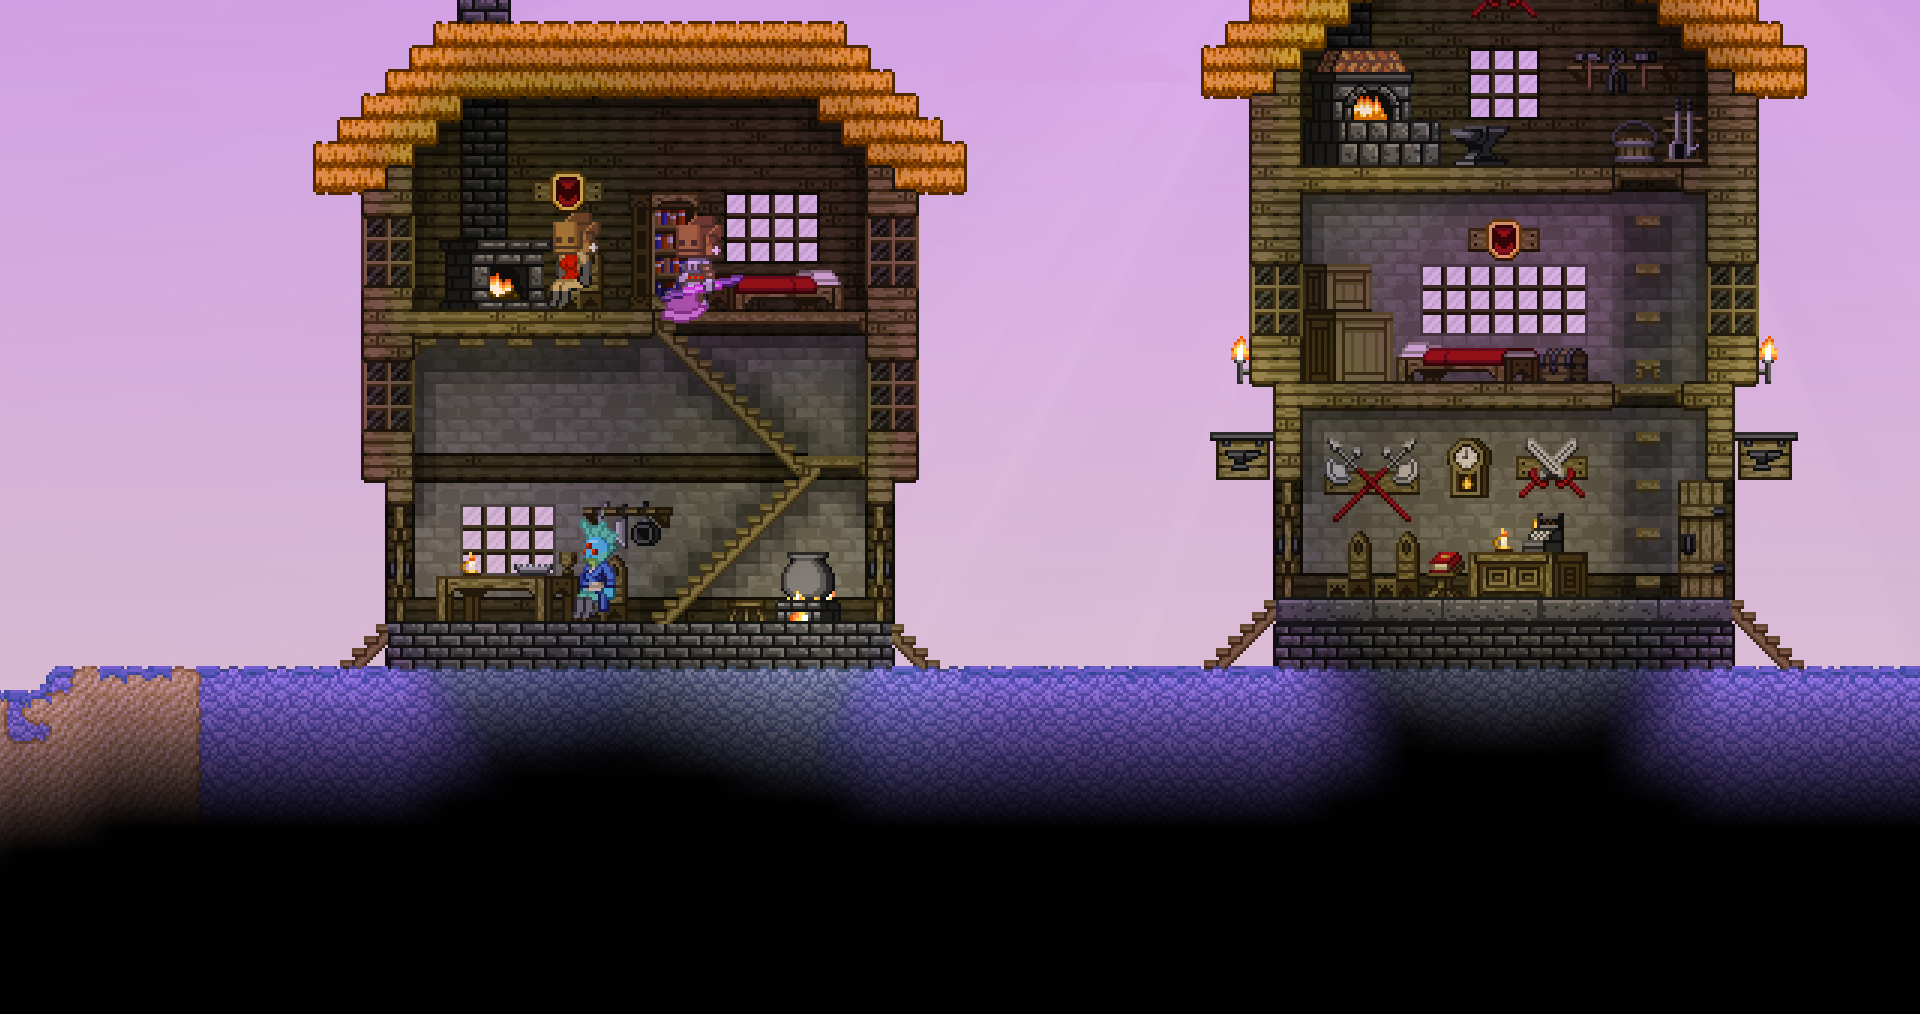 recoving starbound save file